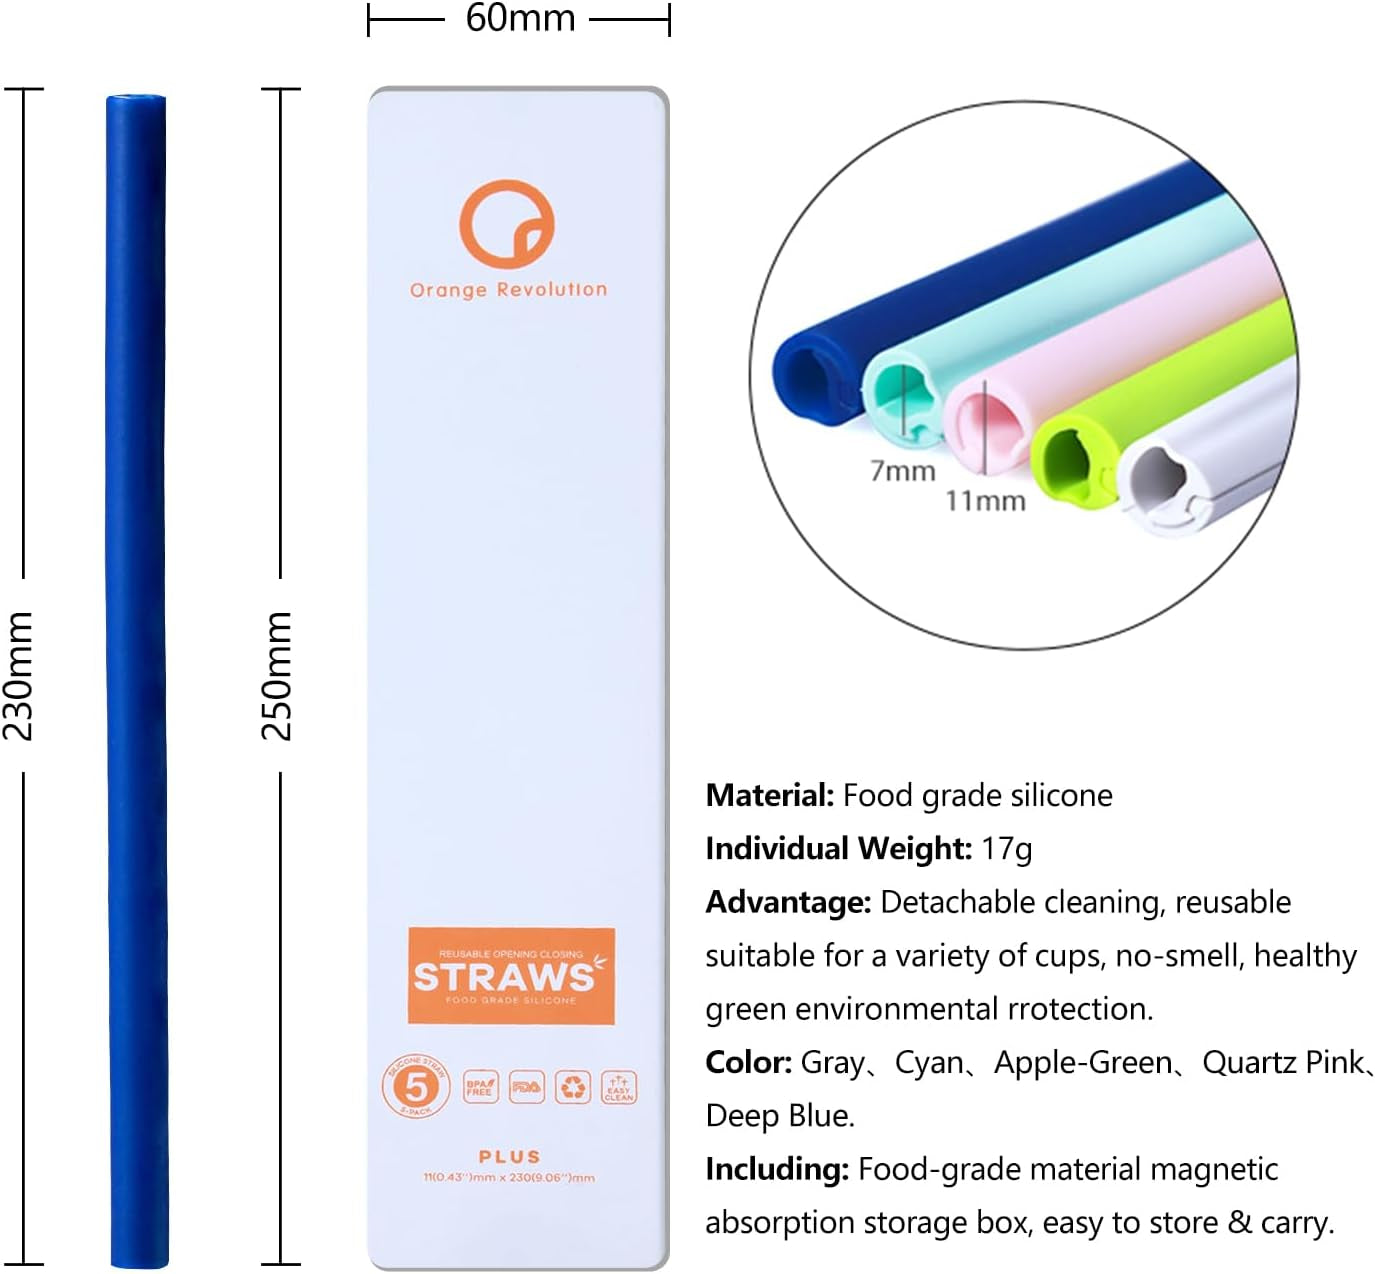 5Pcs Reusable Silicone Straws, Food Grade Openable Drinking Straw, BPA Free Snap Straws,Open for Cleaning, Flexible Straw Hot & Cold Compatible for Home,Party,Travel